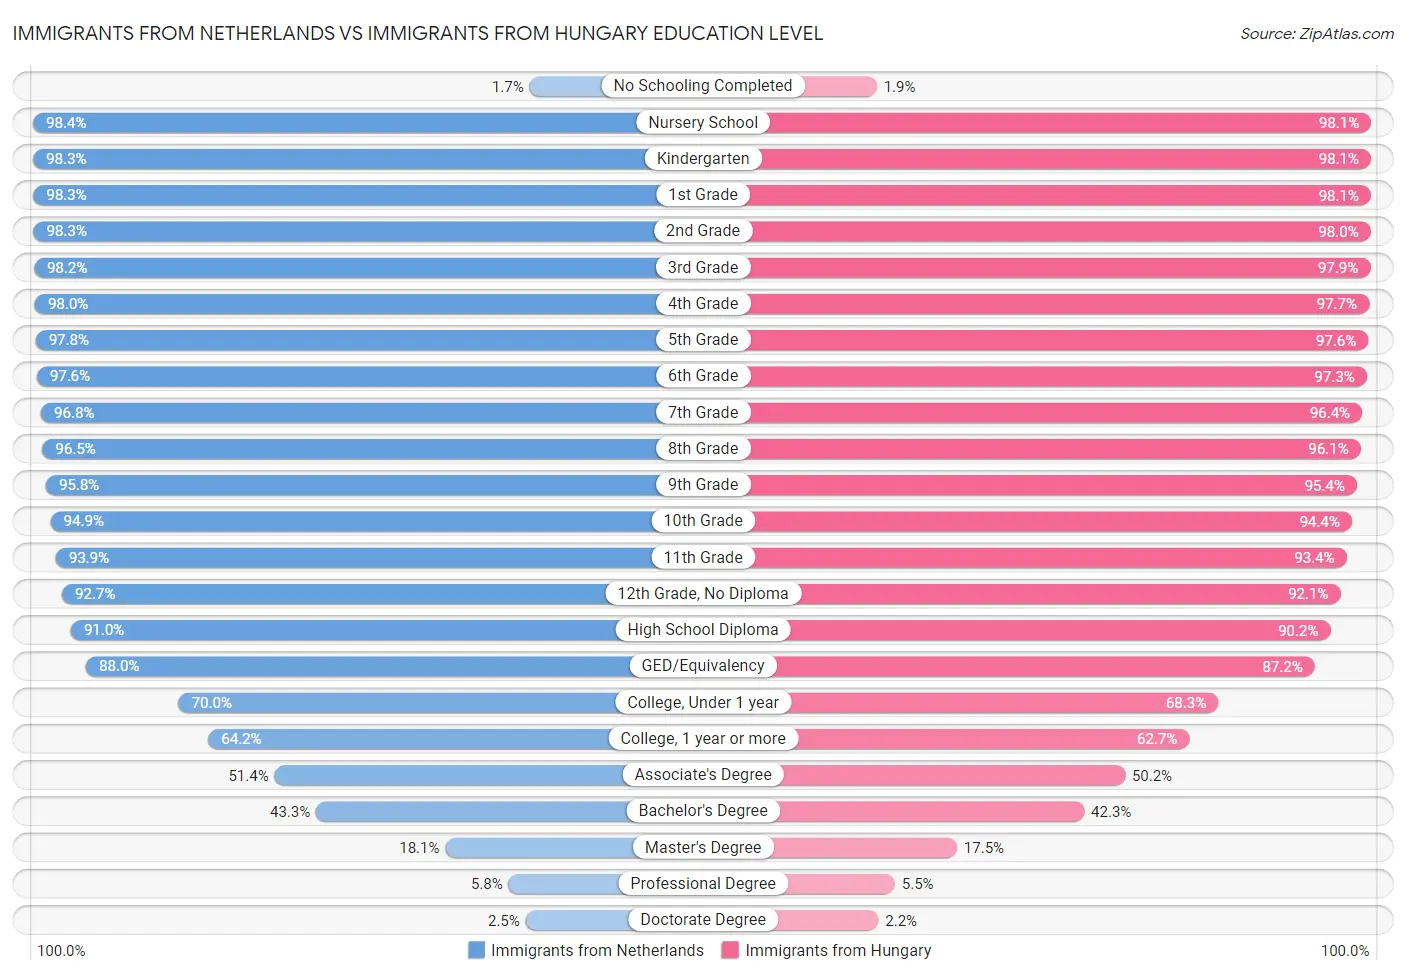 Immigrants from Netherlands vs Immigrants from Hungary Education Level